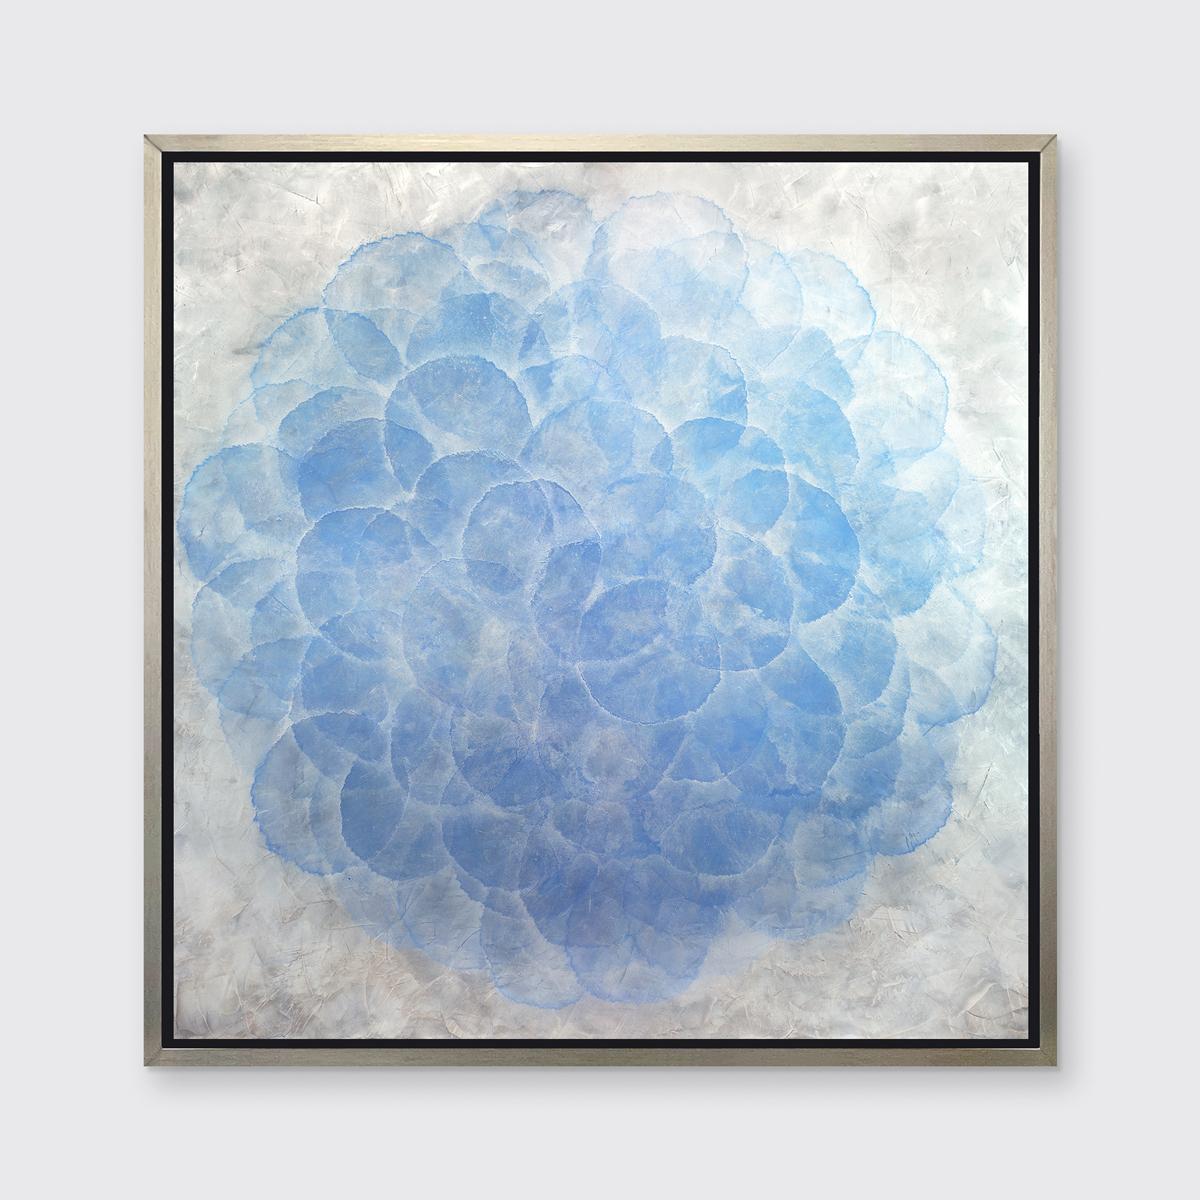 "Dichondra, " Framed Limited Edition Giclee Print, 40" x 40"